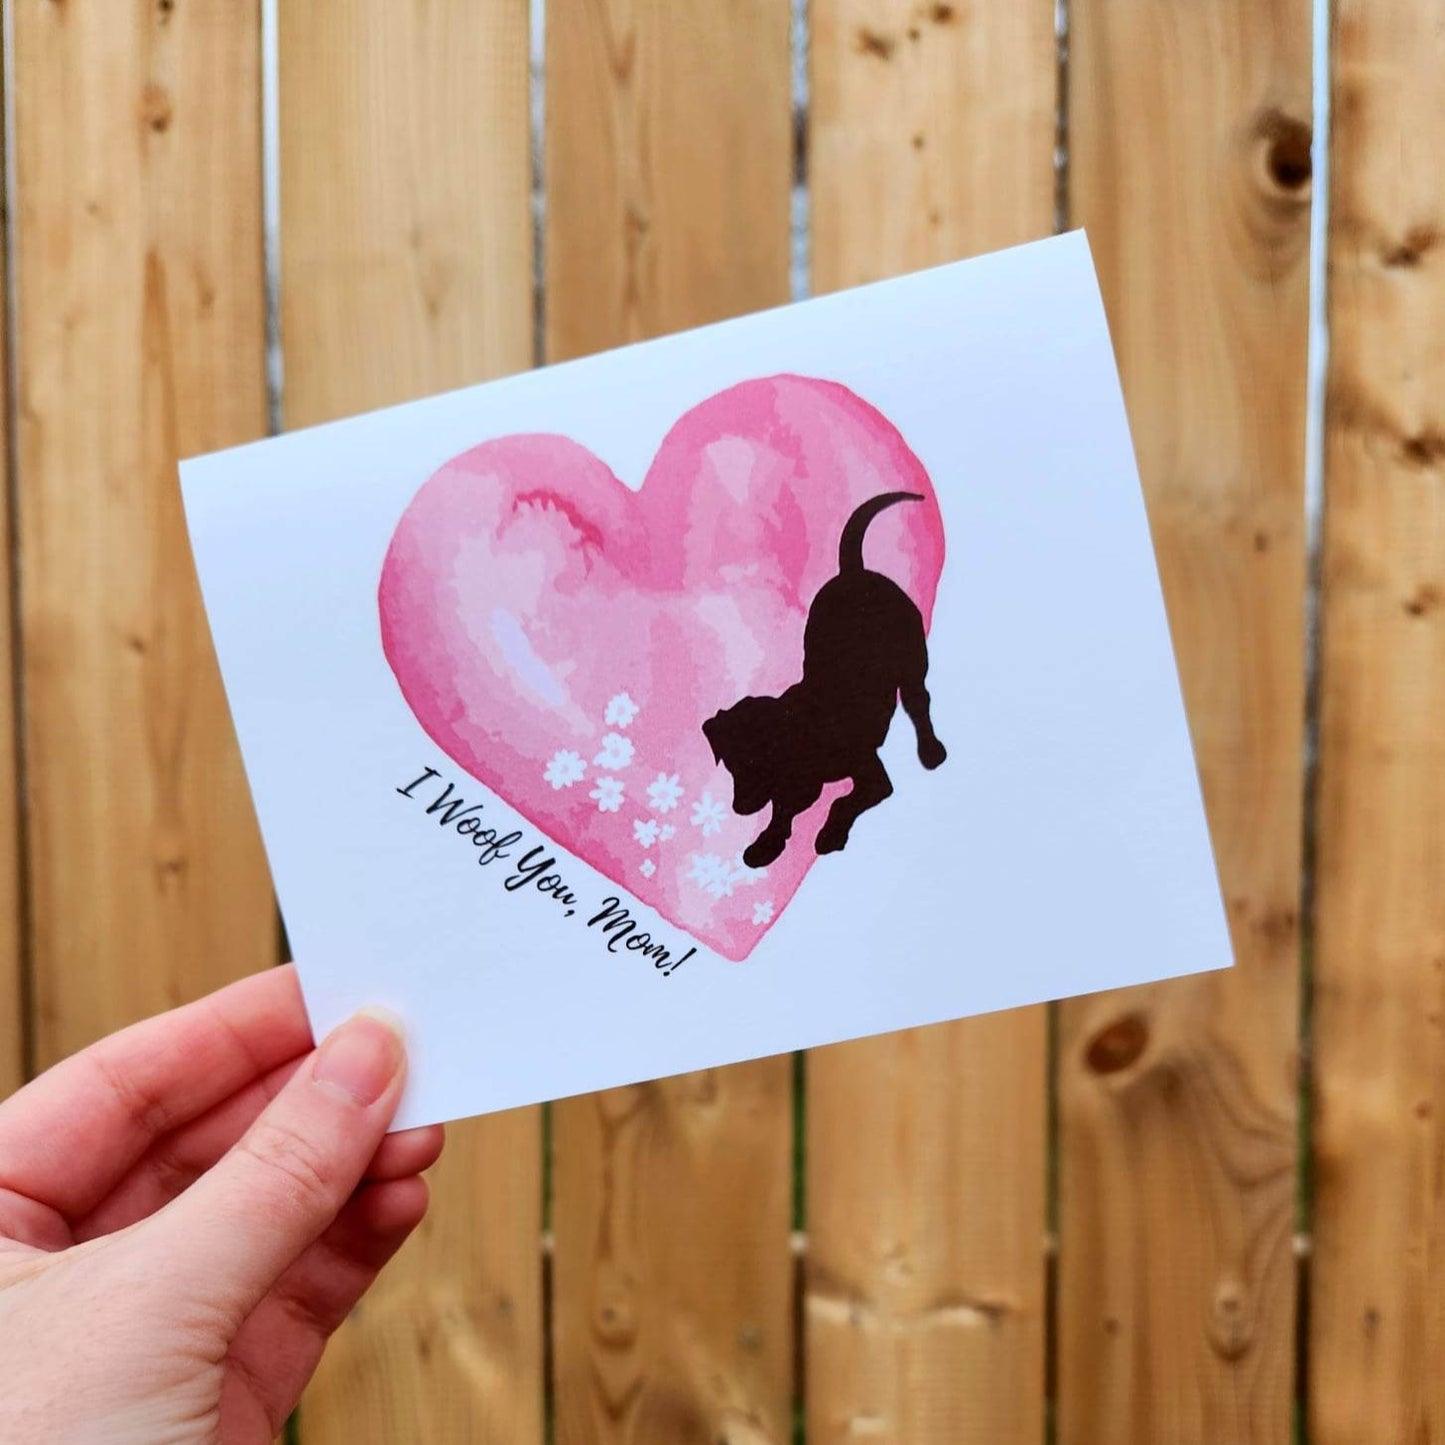 I woof you mom, Mother's Day card, Dog mom card, Fur mom card, Card from dog, Cute dog greeting card, I love you card for mom, Family pet